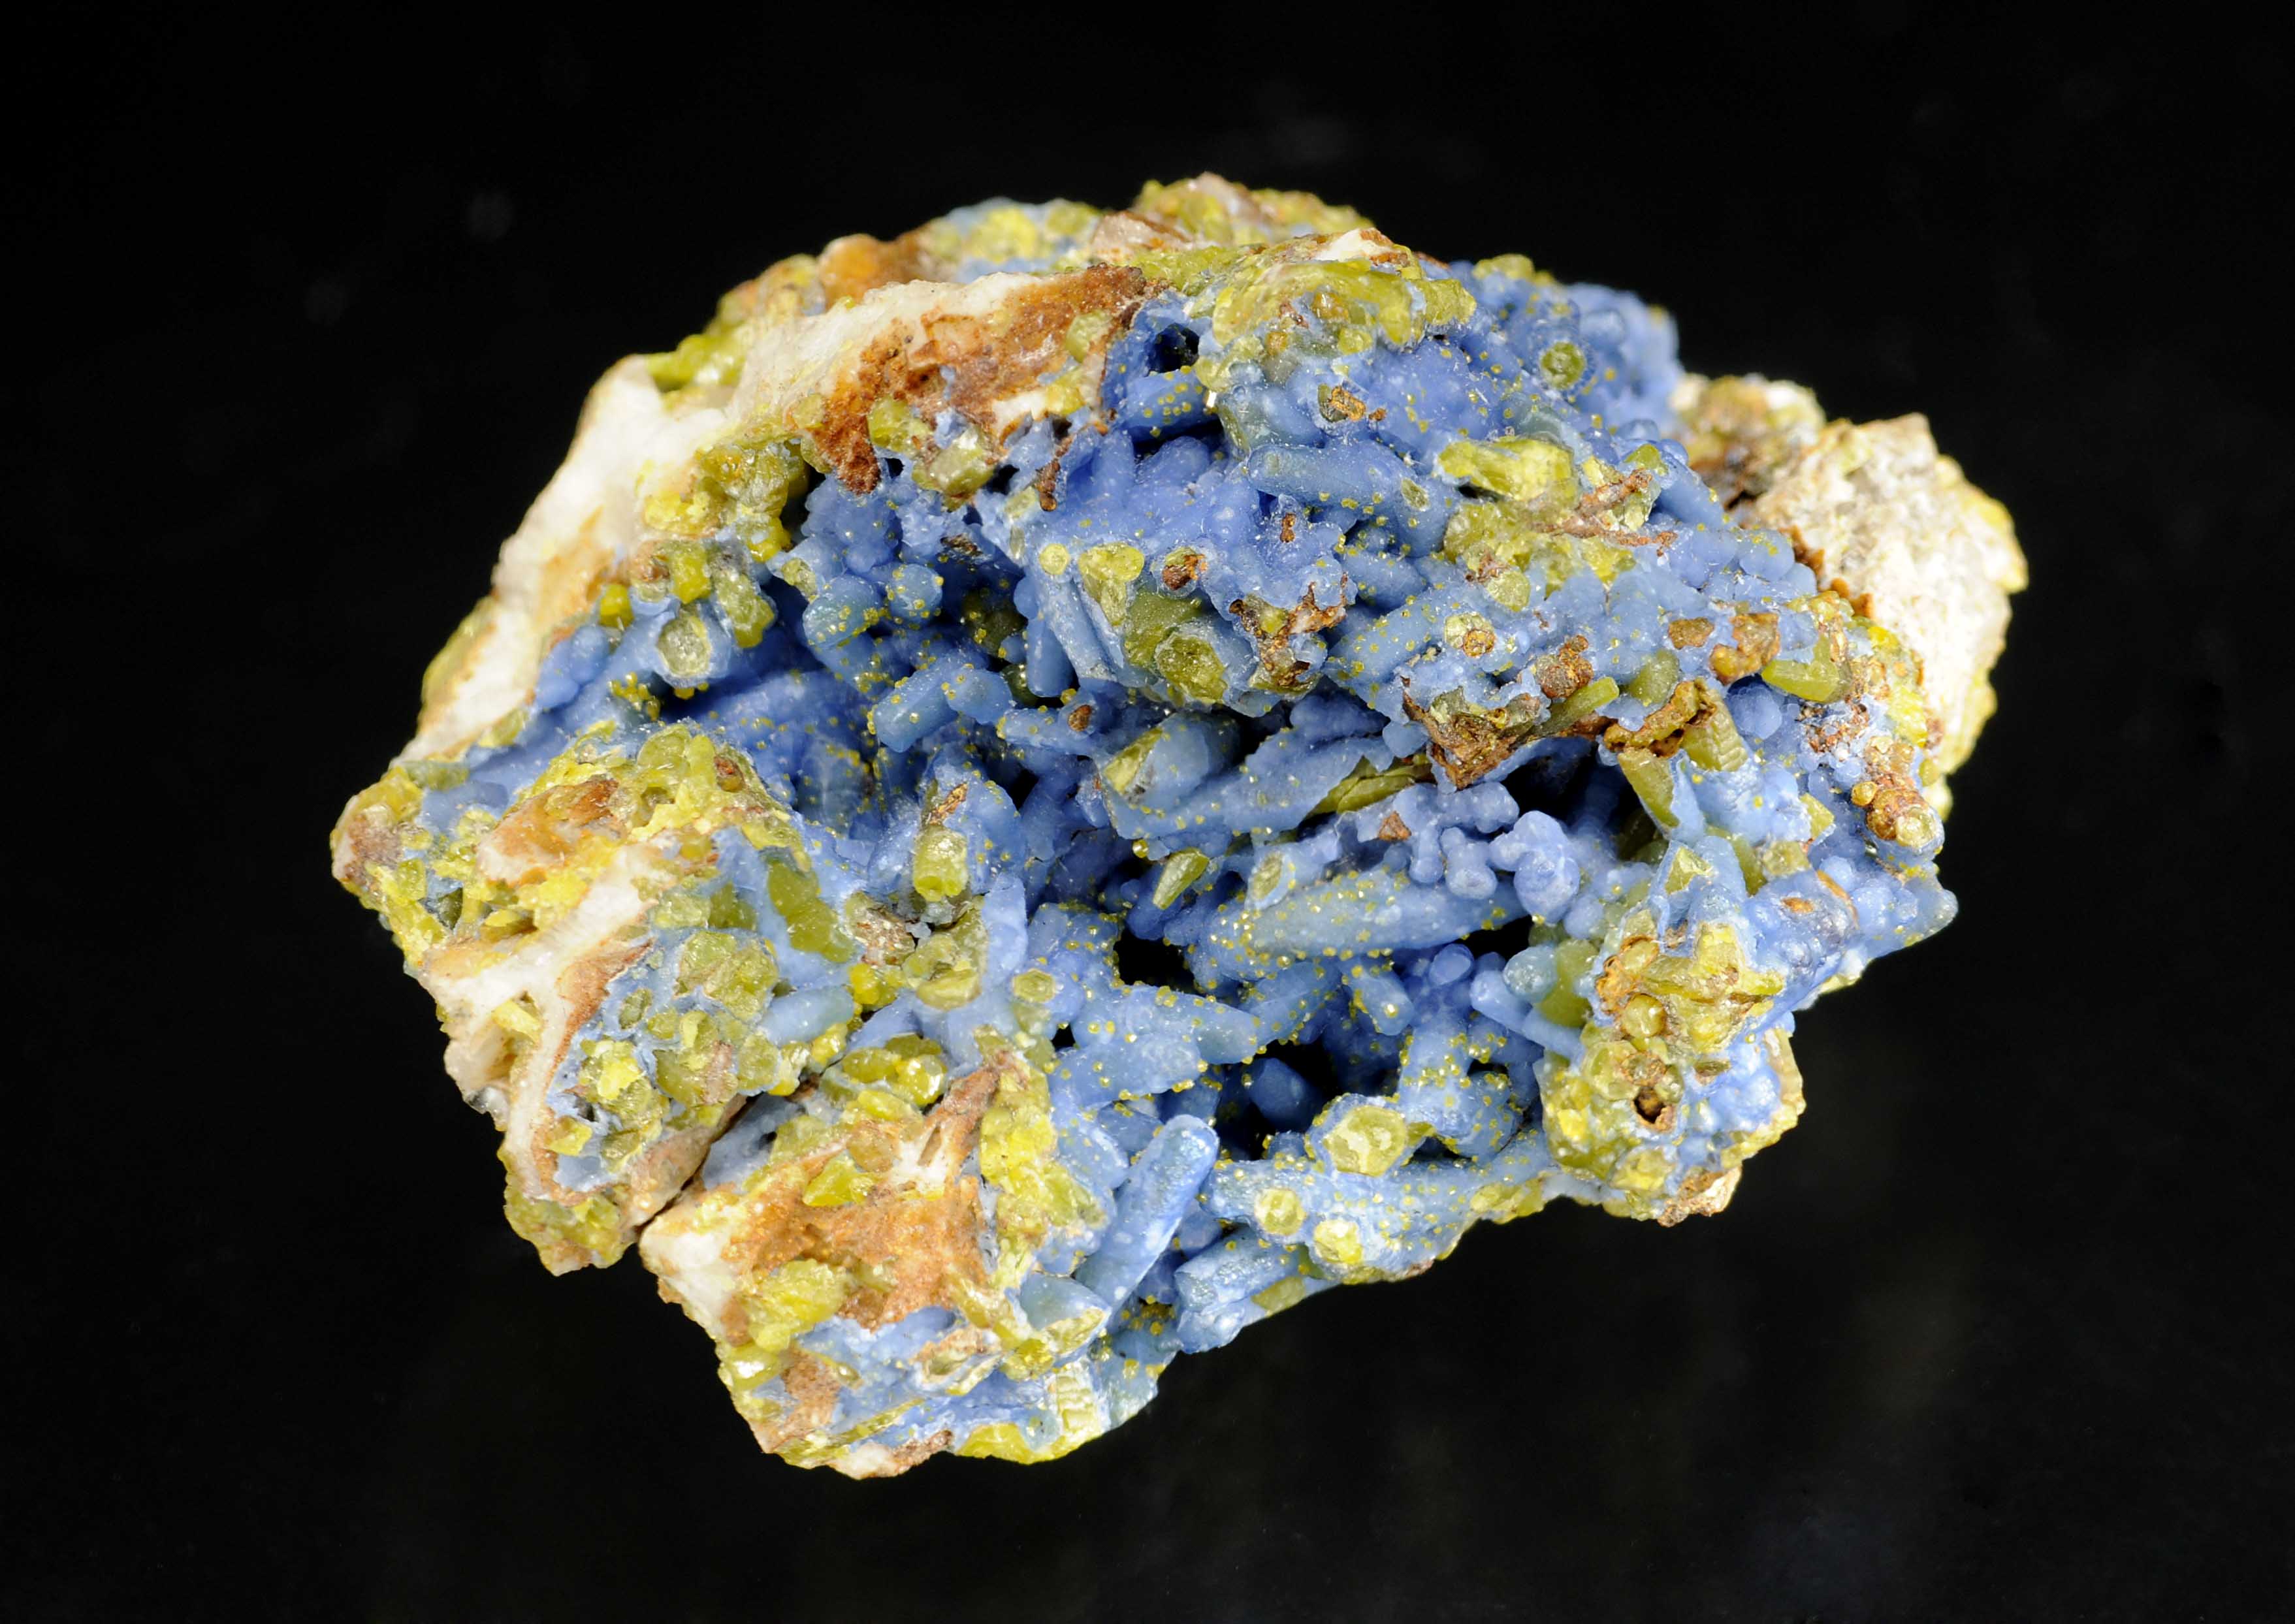 Brightly coloured secondary lead minerals: pyromorphite (green) and plumbogummite (blue) coating quartz veinstone from Roughton Gill, Caldbeck Fells, Cumbria, England. NMW 83.41G.M.7821.